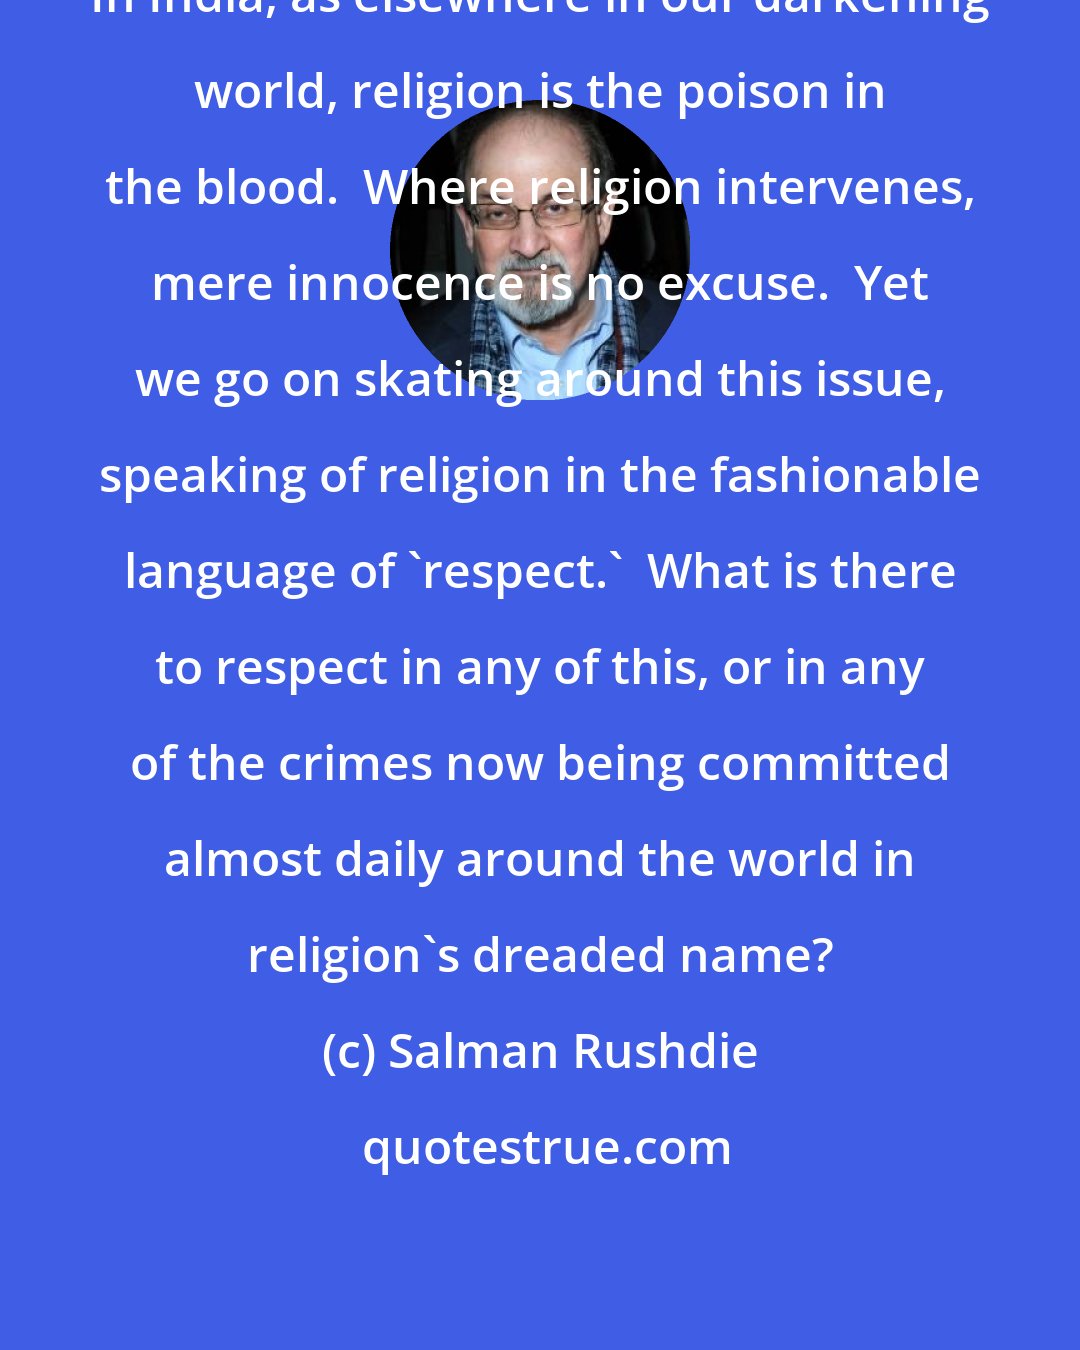 Salman Rushdie: In India, as elsewhere in our darkening world, religion is the poison in the blood.  Where religion intervenes, mere innocence is no excuse.  Yet we go on skating around this issue, speaking of religion in the fashionable language of 'respect.'  What is there to respect in any of this, or in any of the crimes now being committed almost daily around the world in religion's dreaded name?